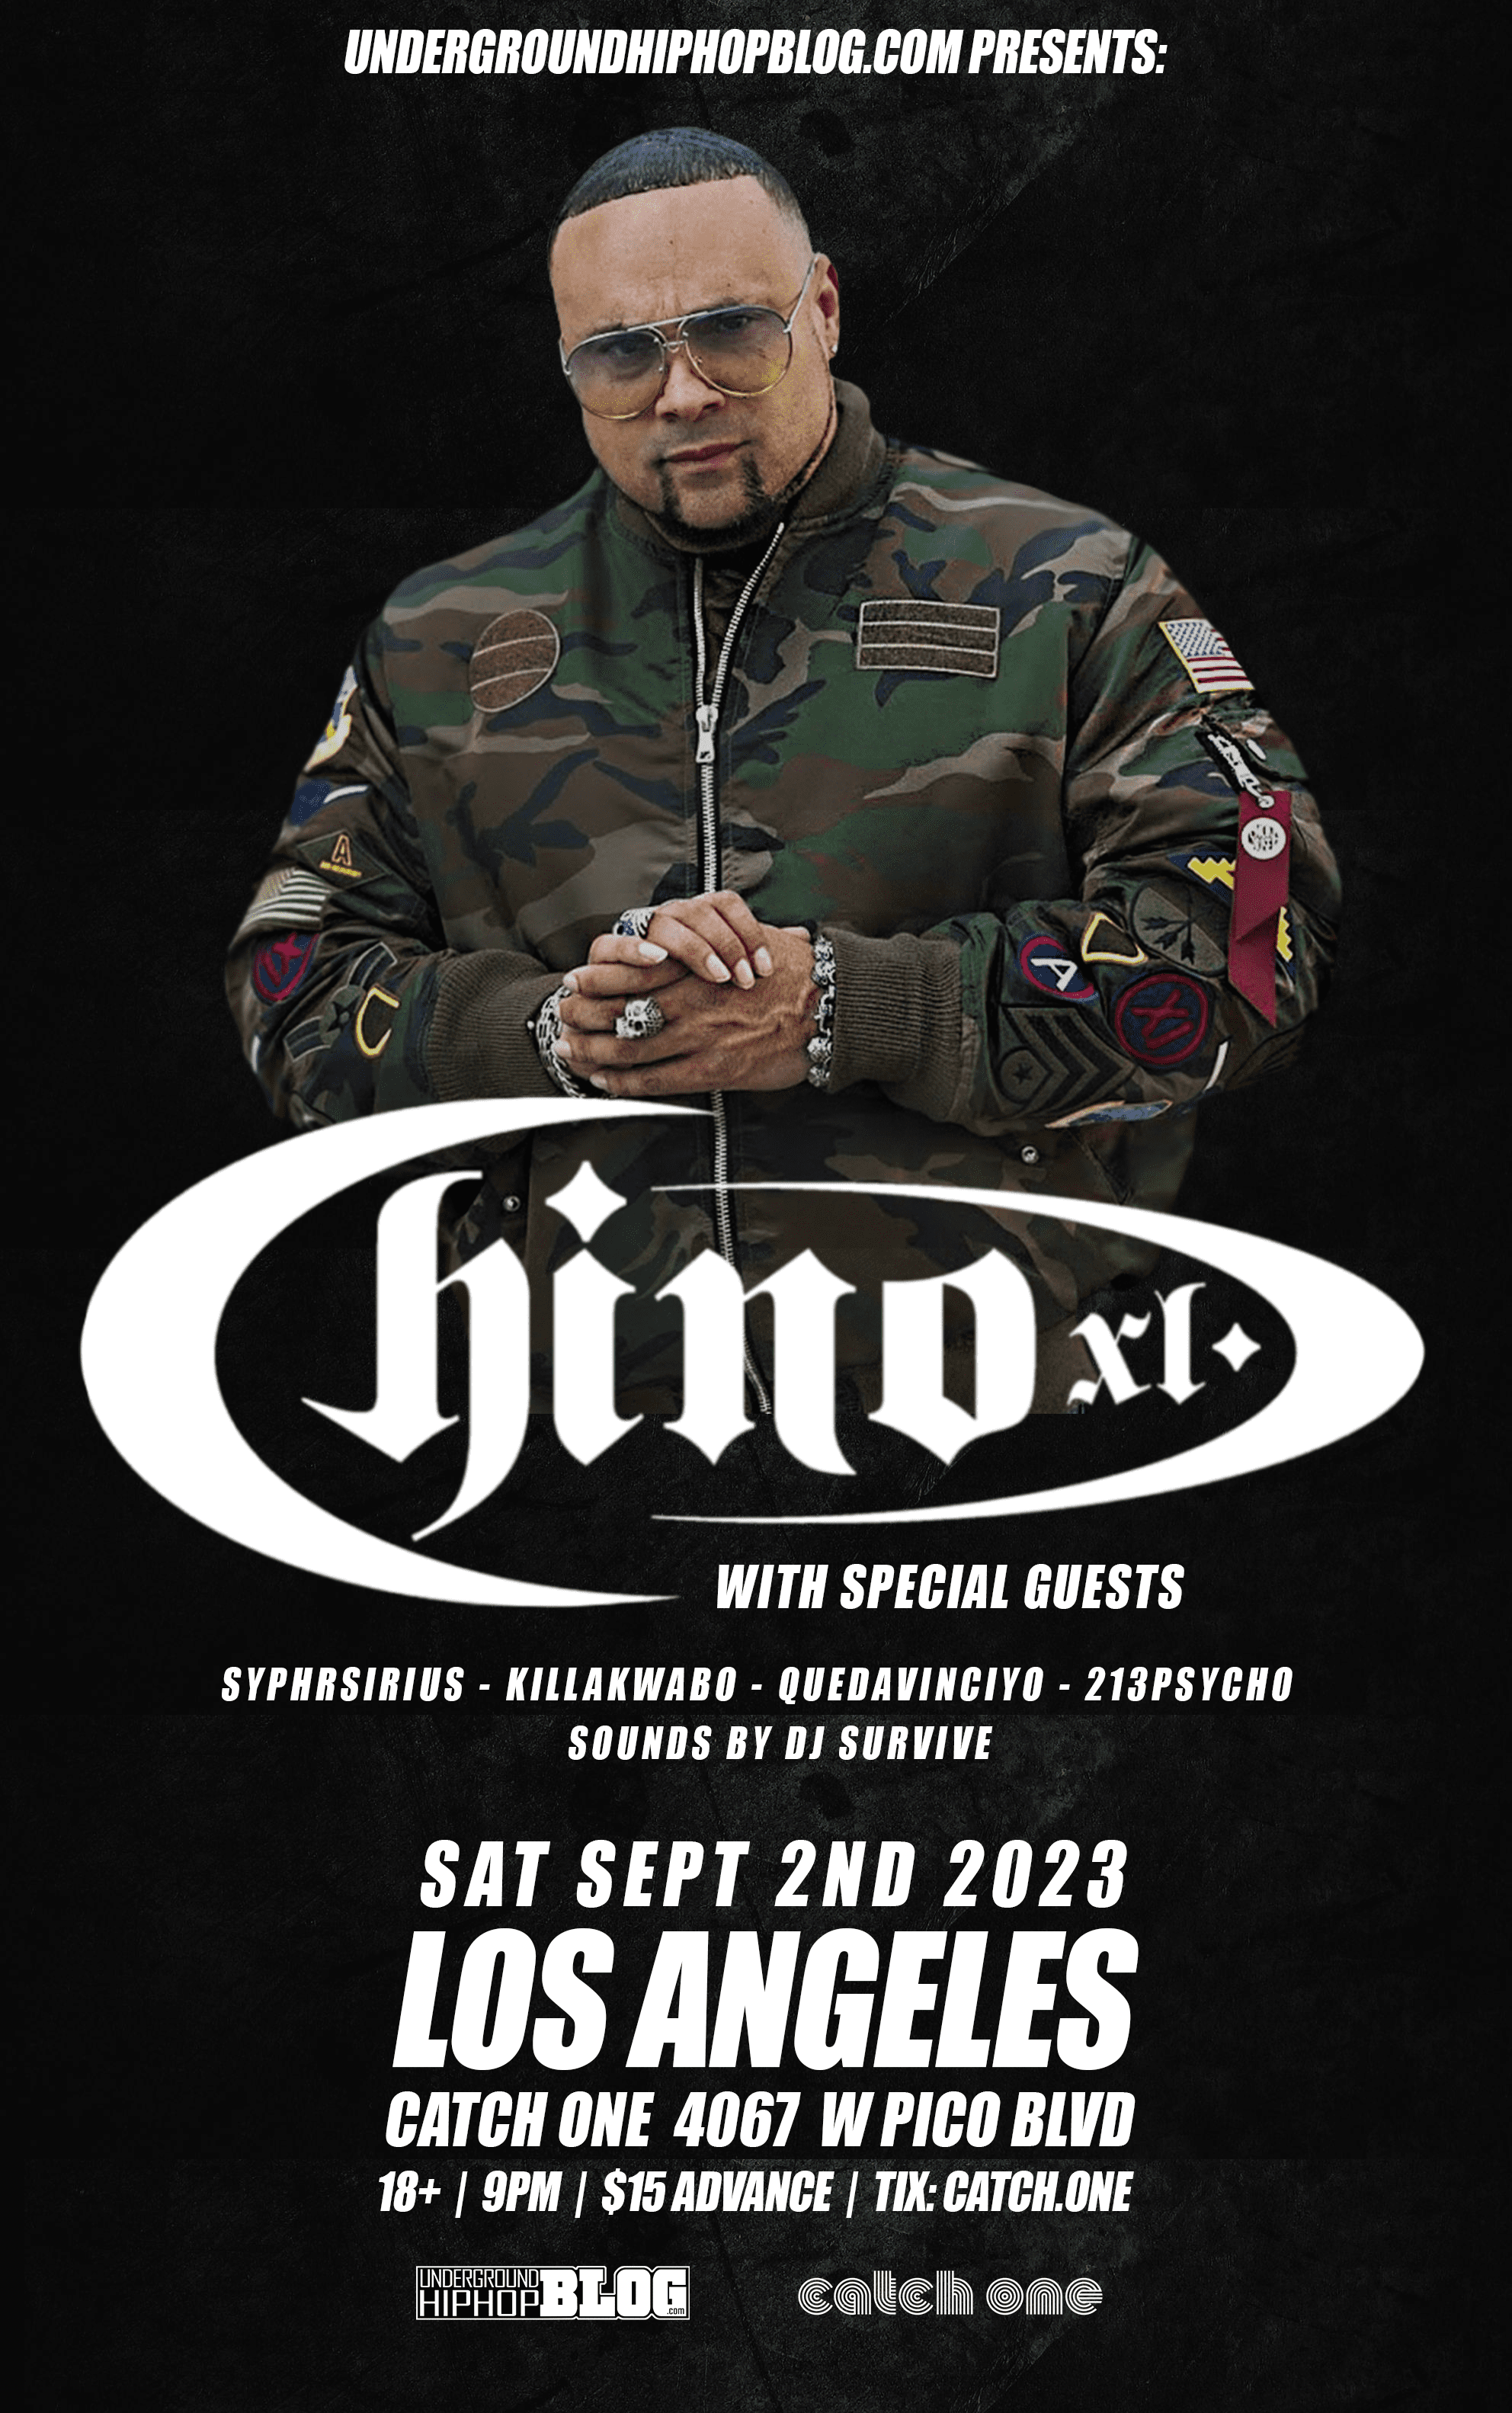 Chino XL Hits Los Angeles Sat Sept 2nd 2023 At Catch One ...